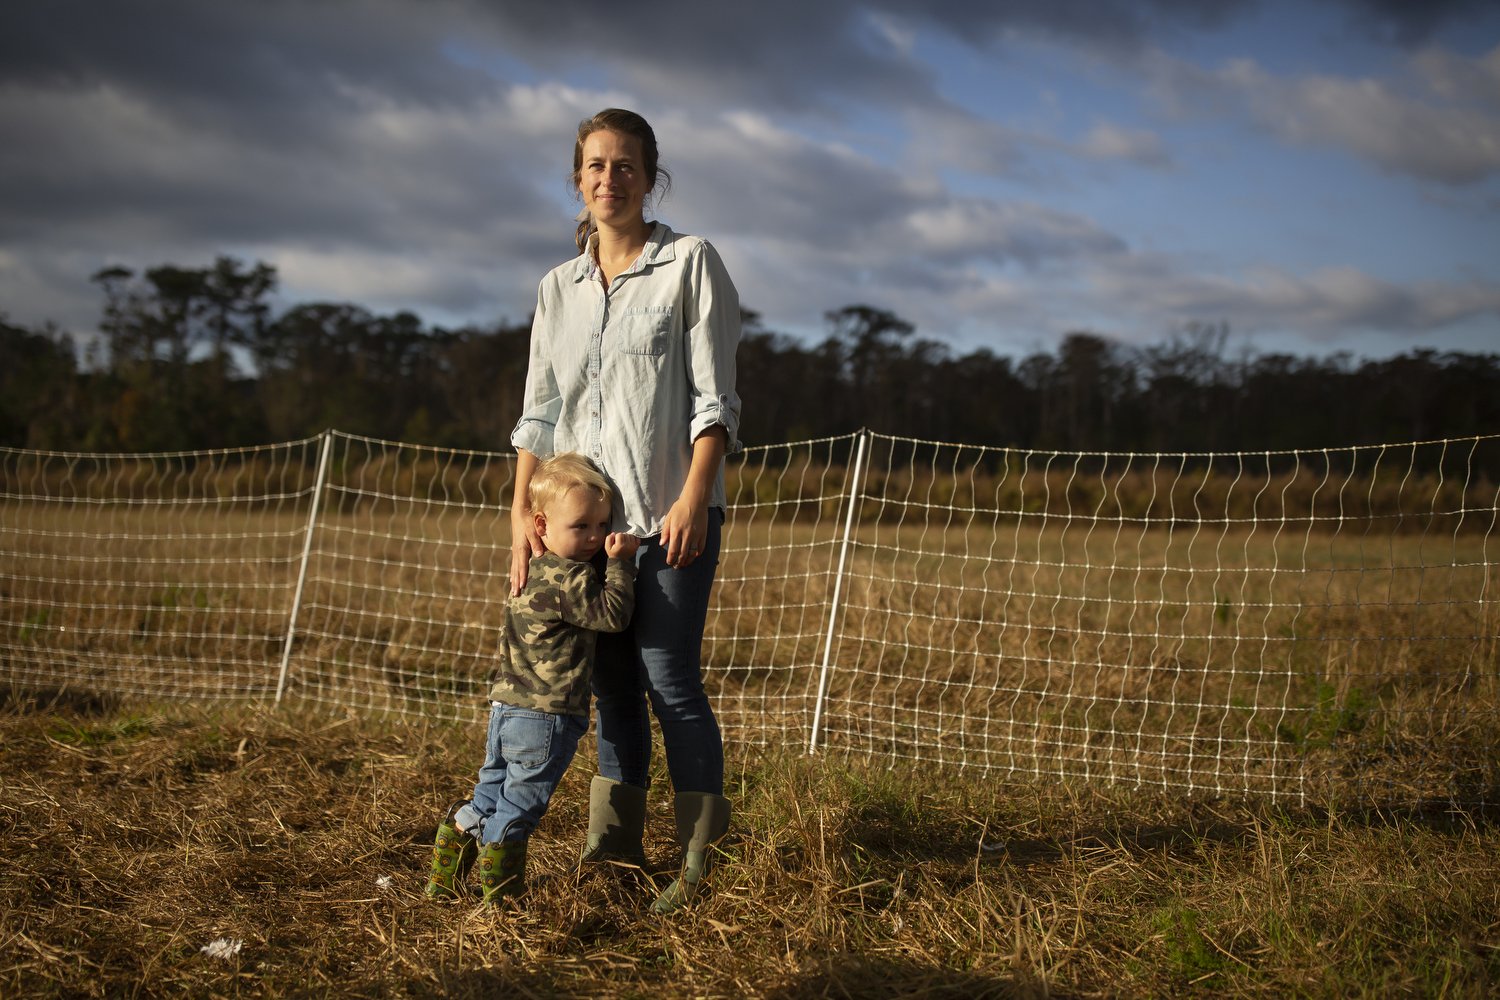  Rachel Shenk, right, and her son Mason Shenk, 3, left, stand in the open-air turkey enclosure on their farm in Newport, North Carolina. Rachel explains that one of her primary motivations in starting a farm was “so that we could do it as a family.” 